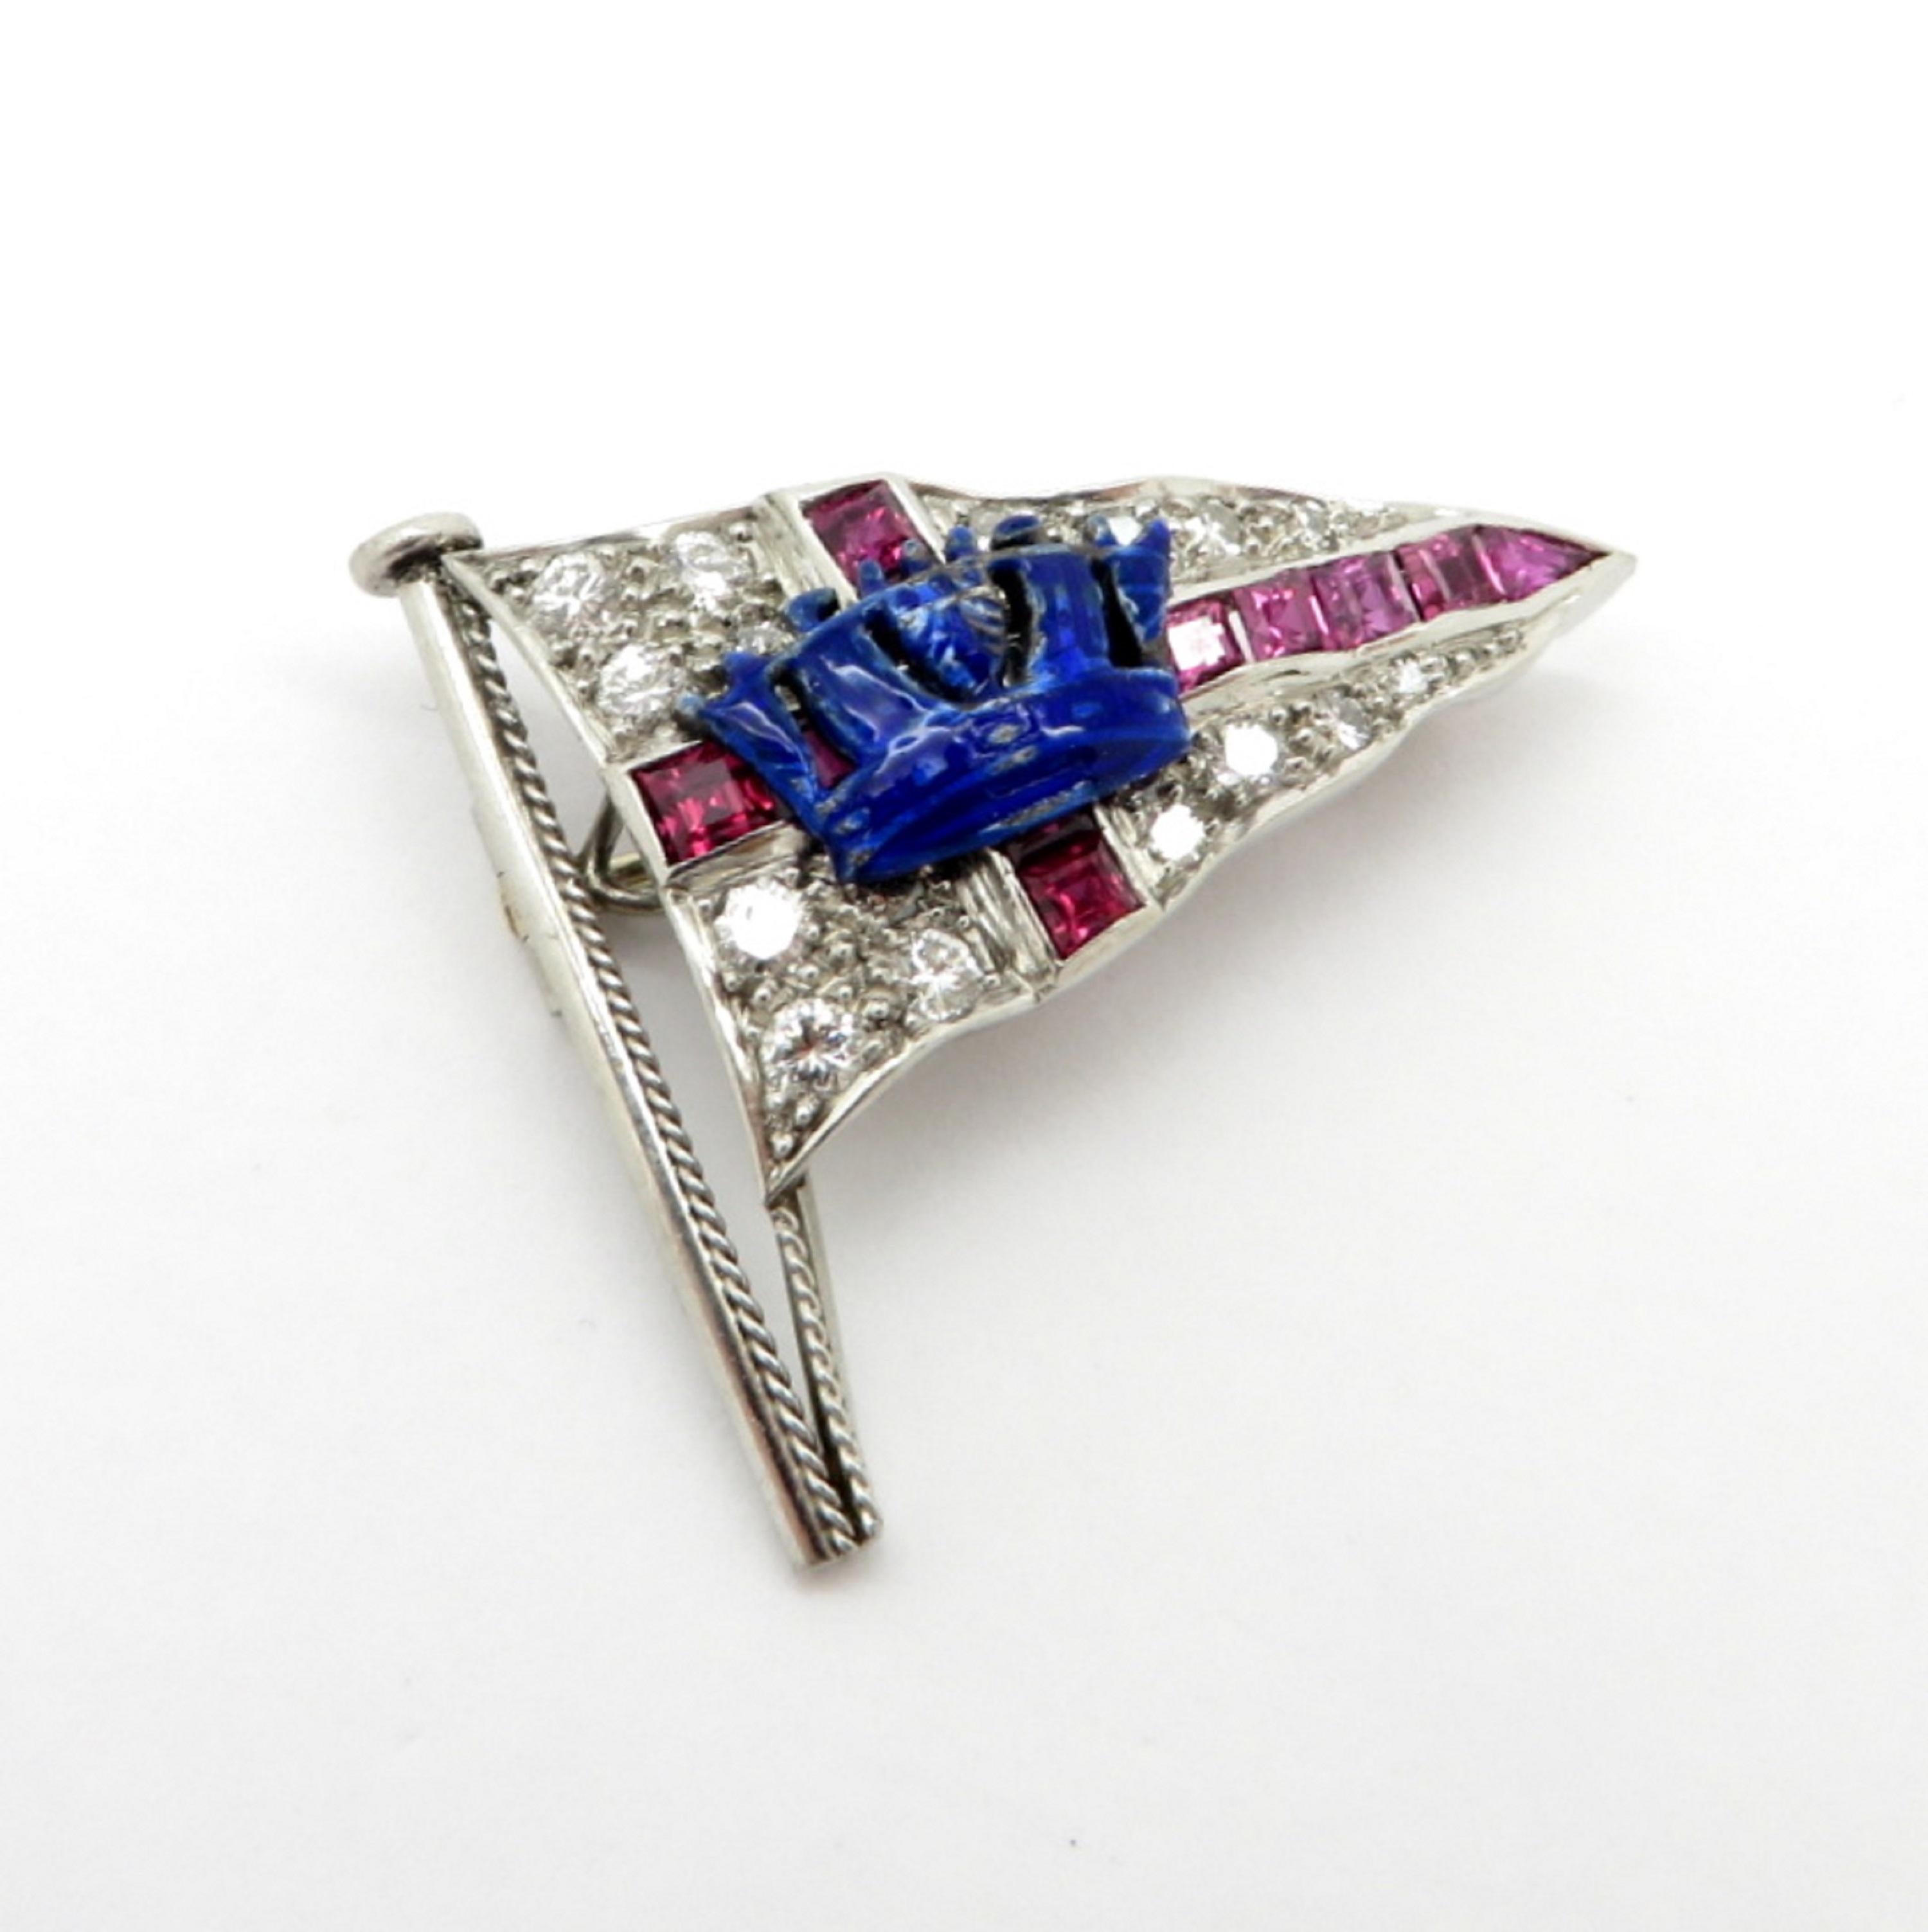 Platinum estate crown flag brooch pin with diamonds, enamel, and synthetic rubies. Featuring a blue enameled crown in the center and 12 carre cut synthetic fine quality rubies. Interspersed with 18 round brilliant cut diamonds weighing approximately